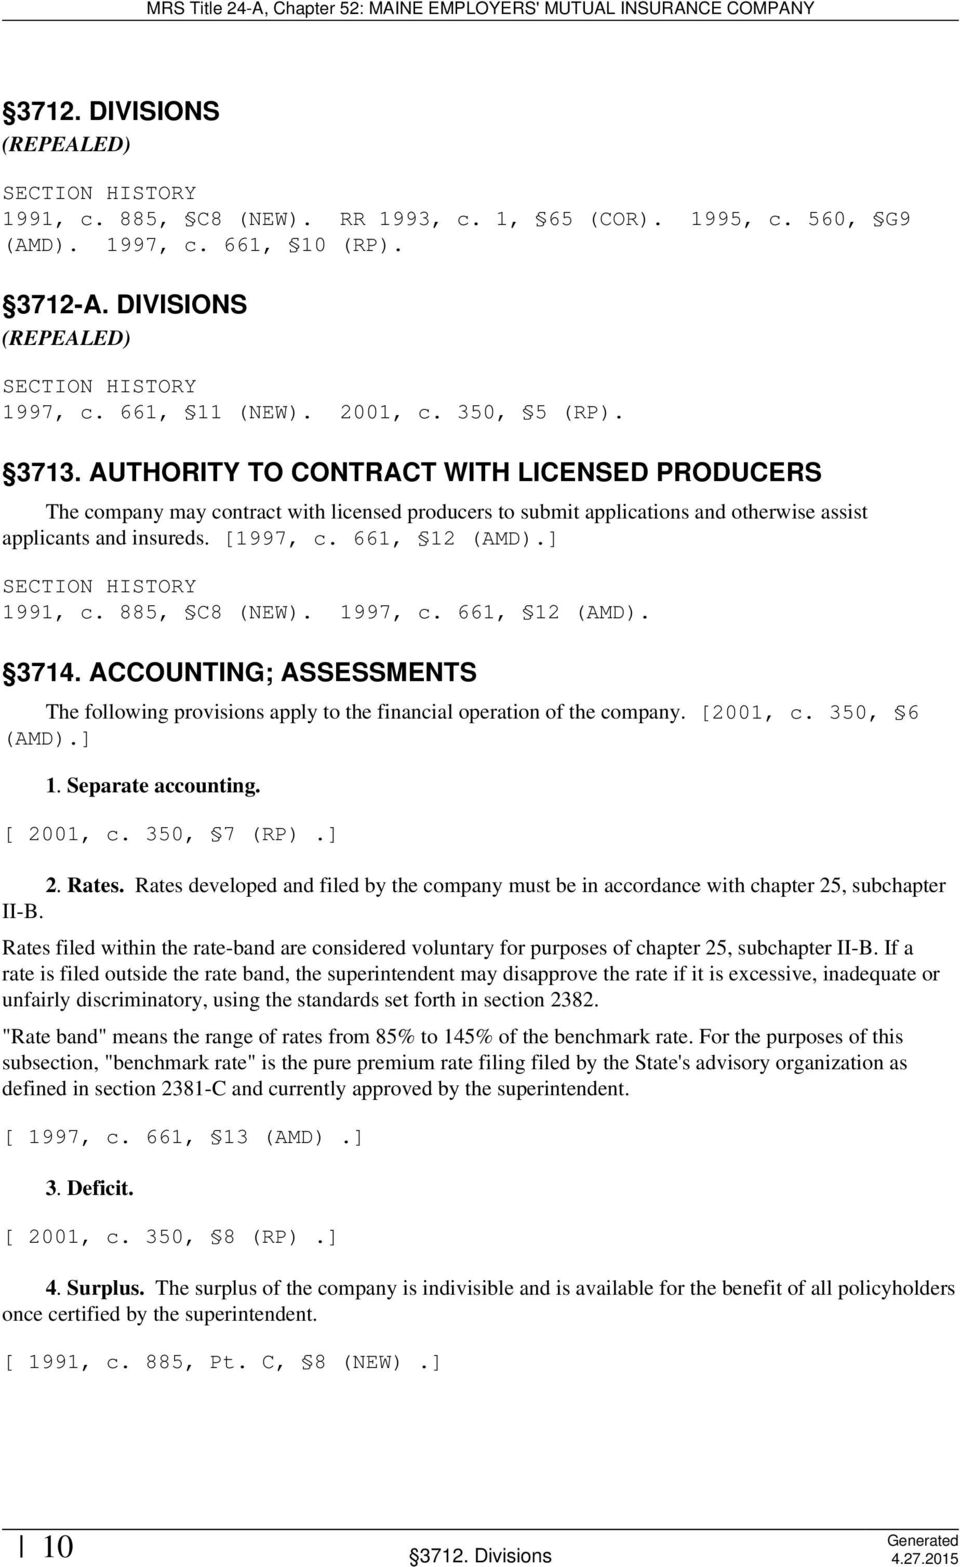 ] 1991, c. 885, C8 (NEW). 1997, c. 661, 12 (AMD). 3714. ACCOUNTING; ASSESSMENTS The following provisions apply to the financial operation of the company. [2001, c. 350, 6 (AMD).] 1. Separate accounting.